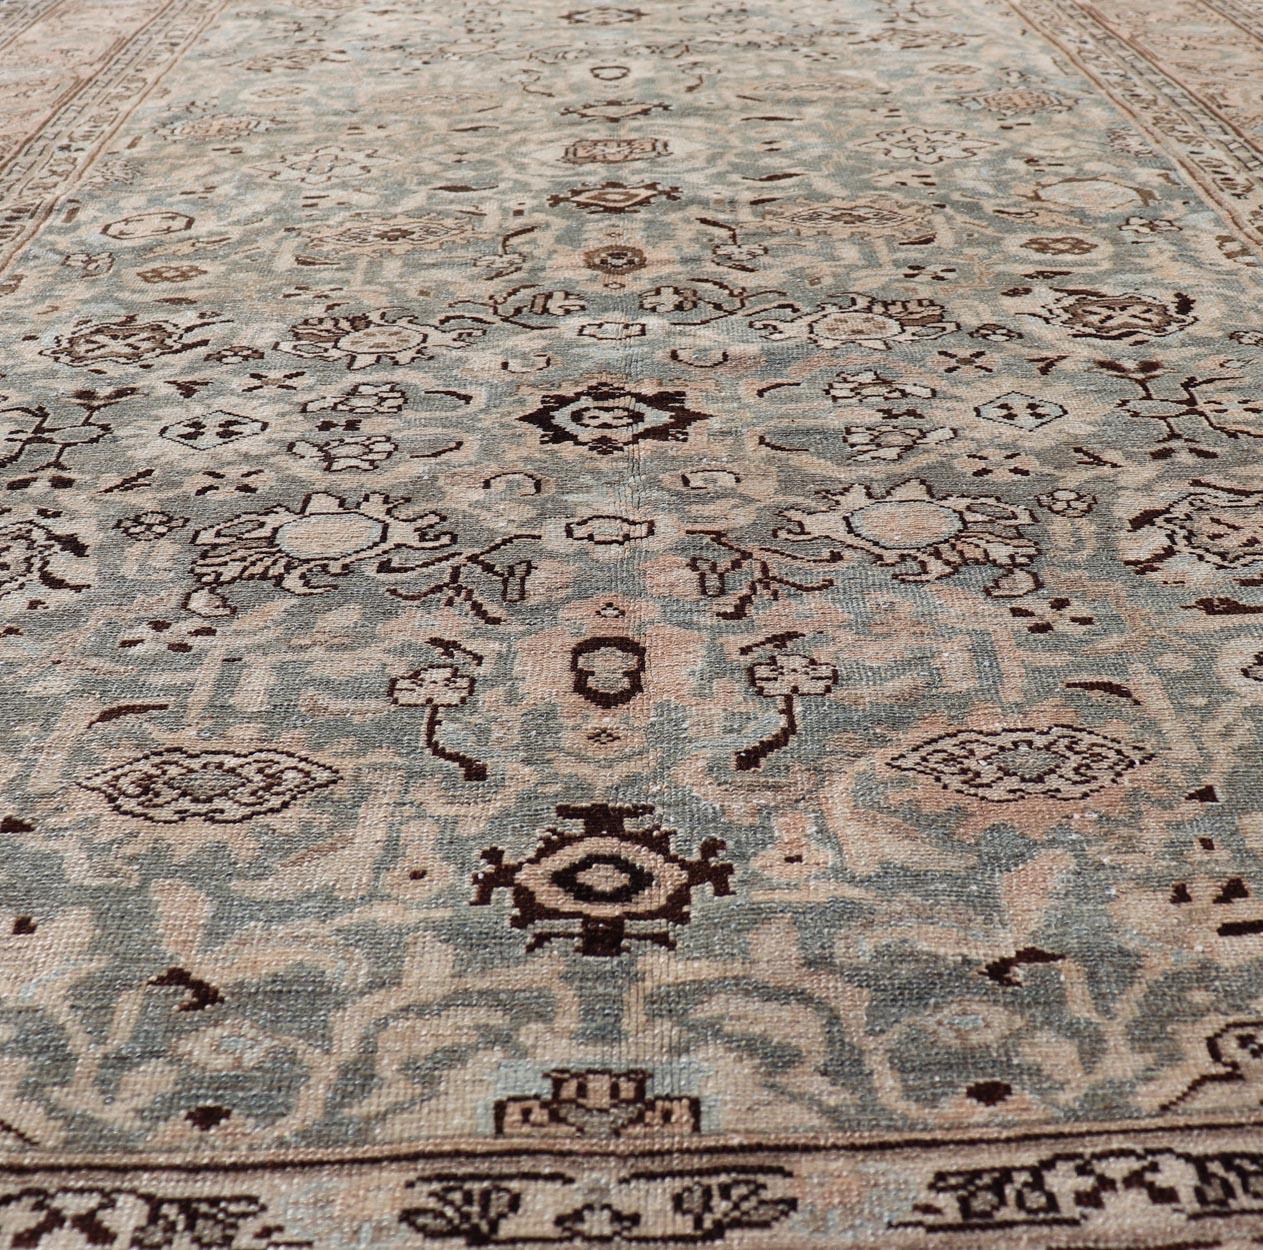 All-Over Floral Antique Persian Hamadan Rug in Gray Green, Peach & Earth Tones For Sale 4